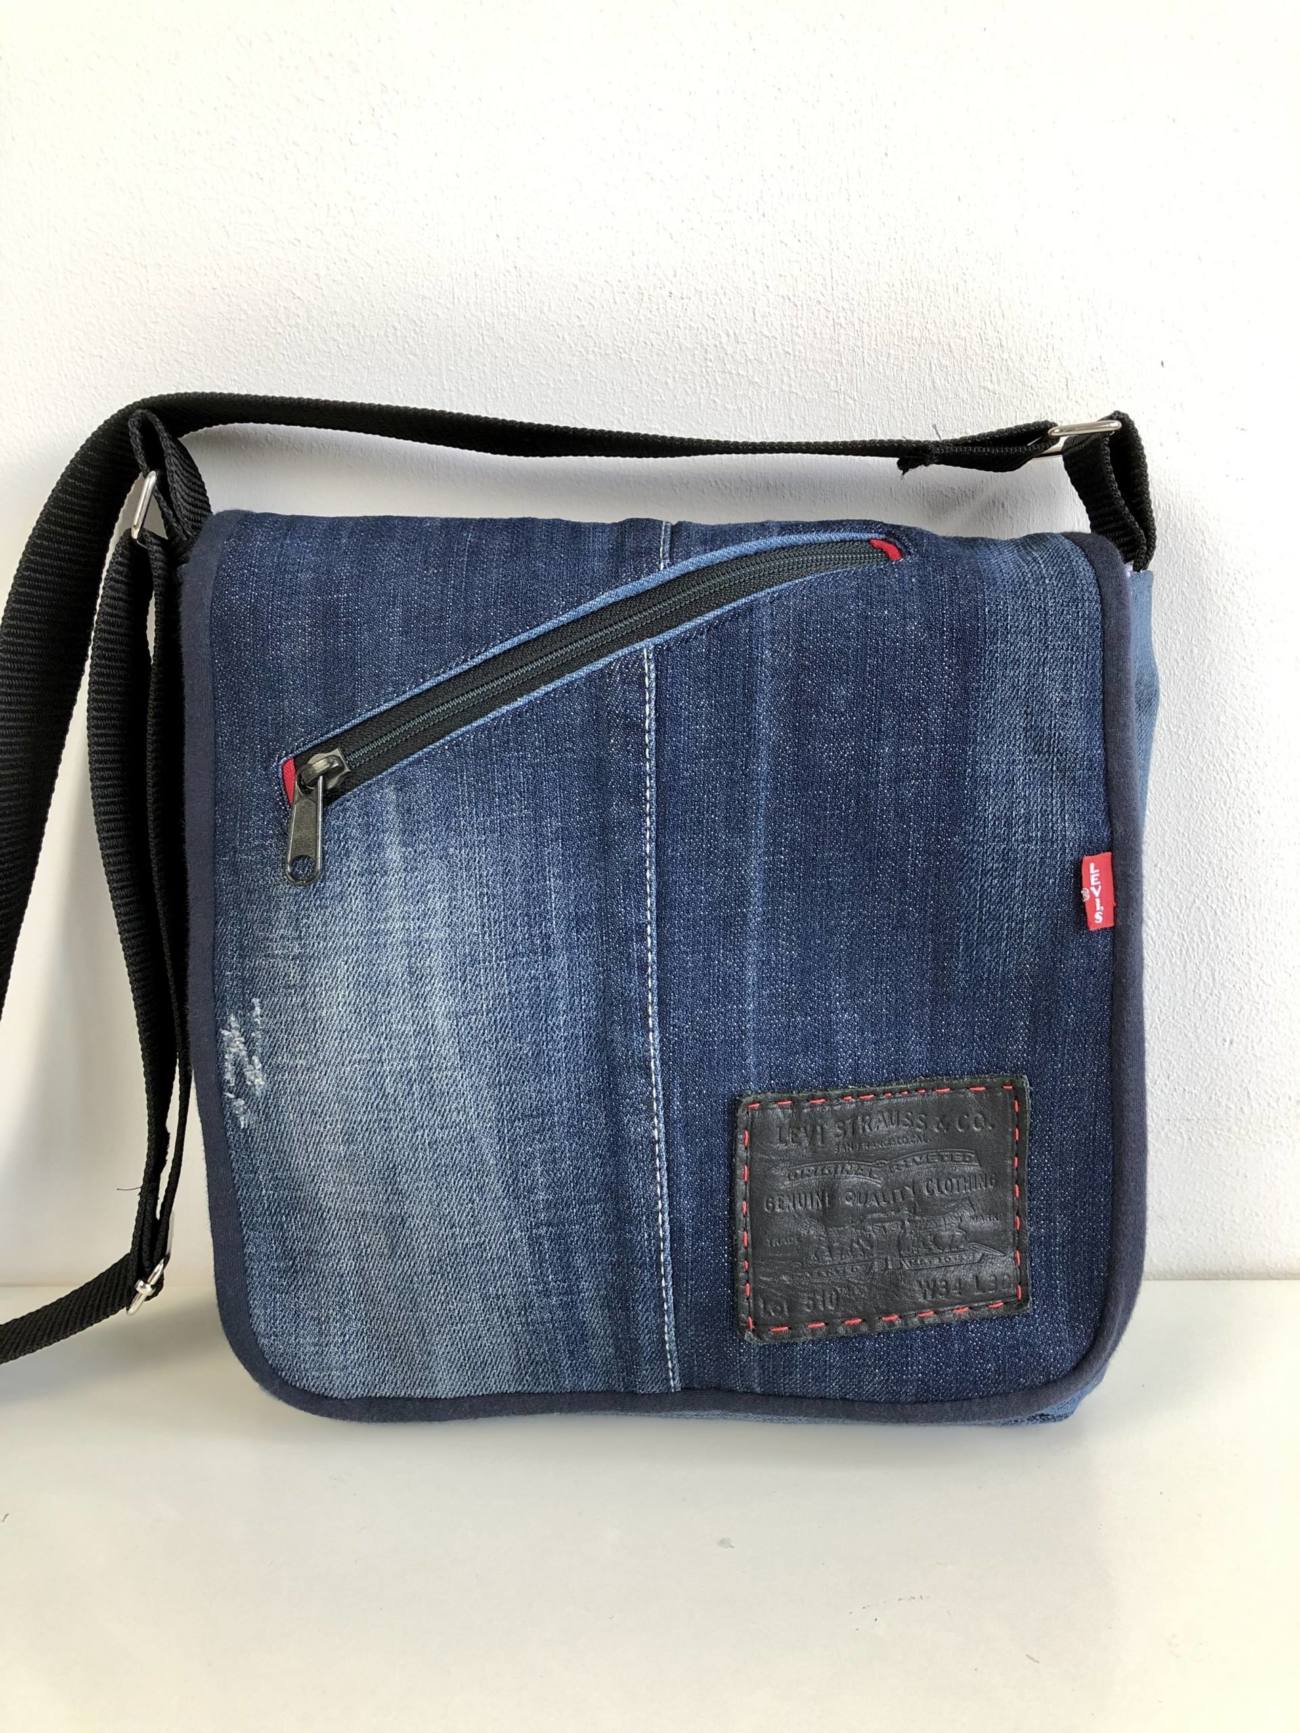 Sew a professional bag with this free messenger bag pattern ...